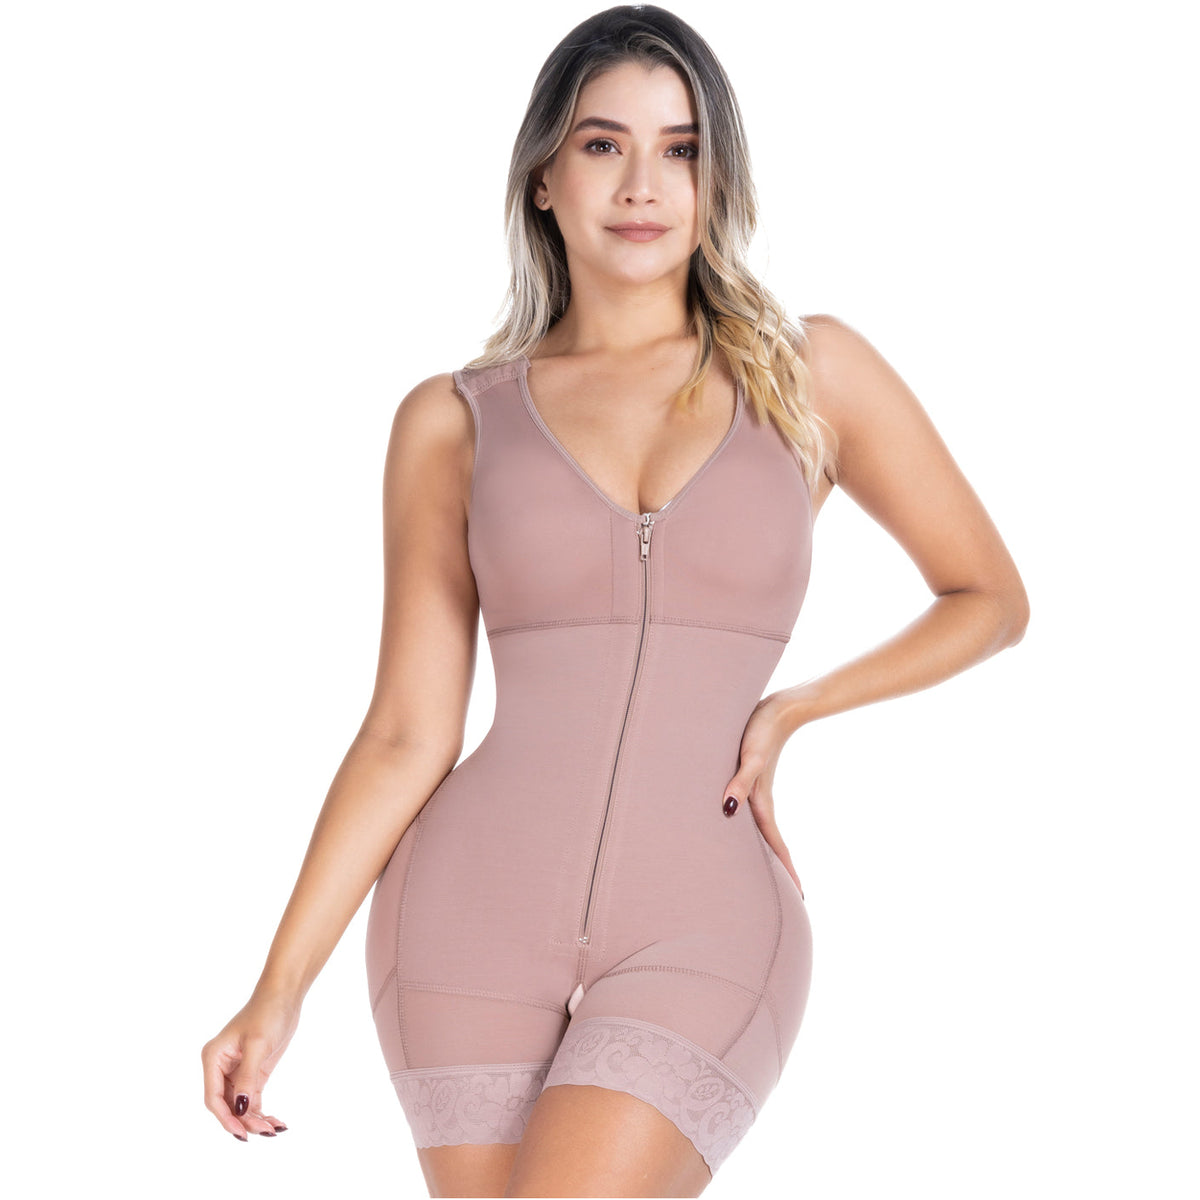 SONRYSE 085ZF | Bodysuit Shapewear with Built-in Bra | Postpartum, Post Surgery, First Stage Use